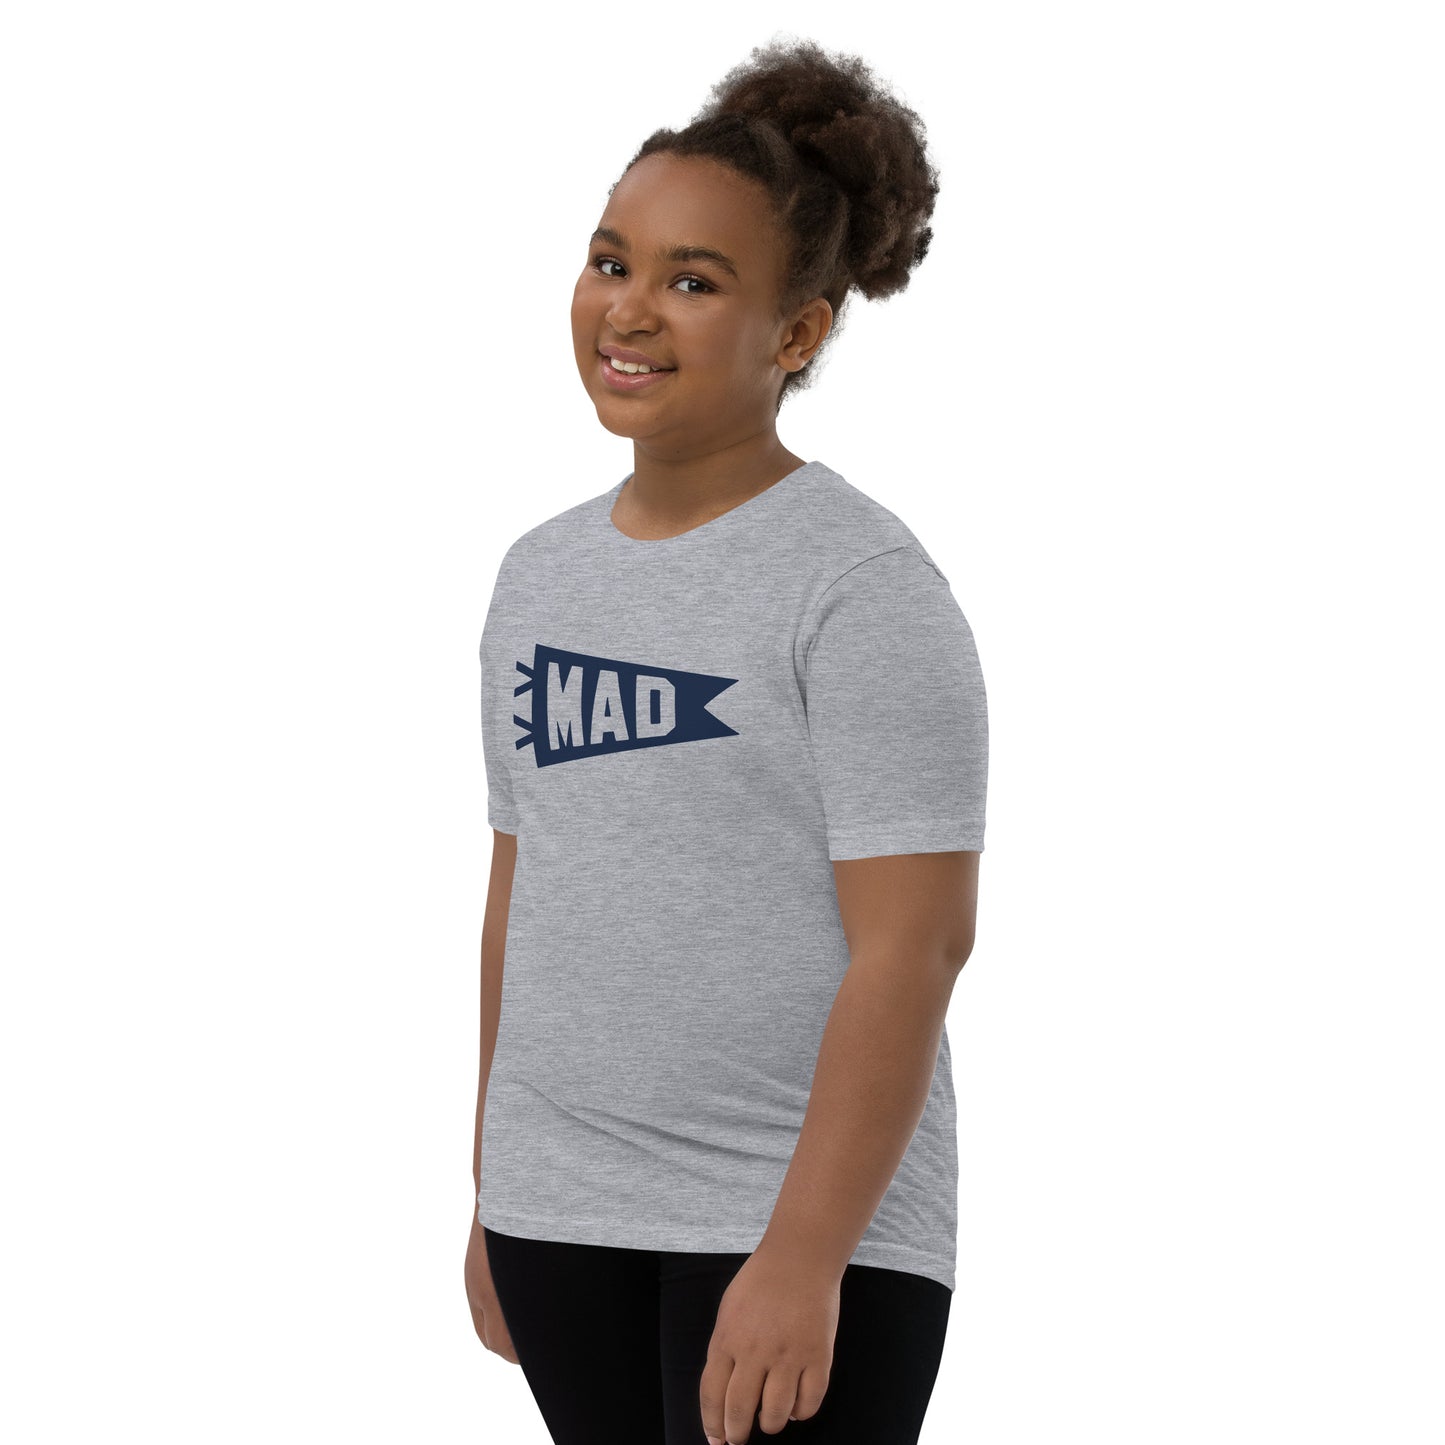 Kid's Airport Code Tee - Navy Blue Graphic • MAD Madrid • YHM Designs - Image 04